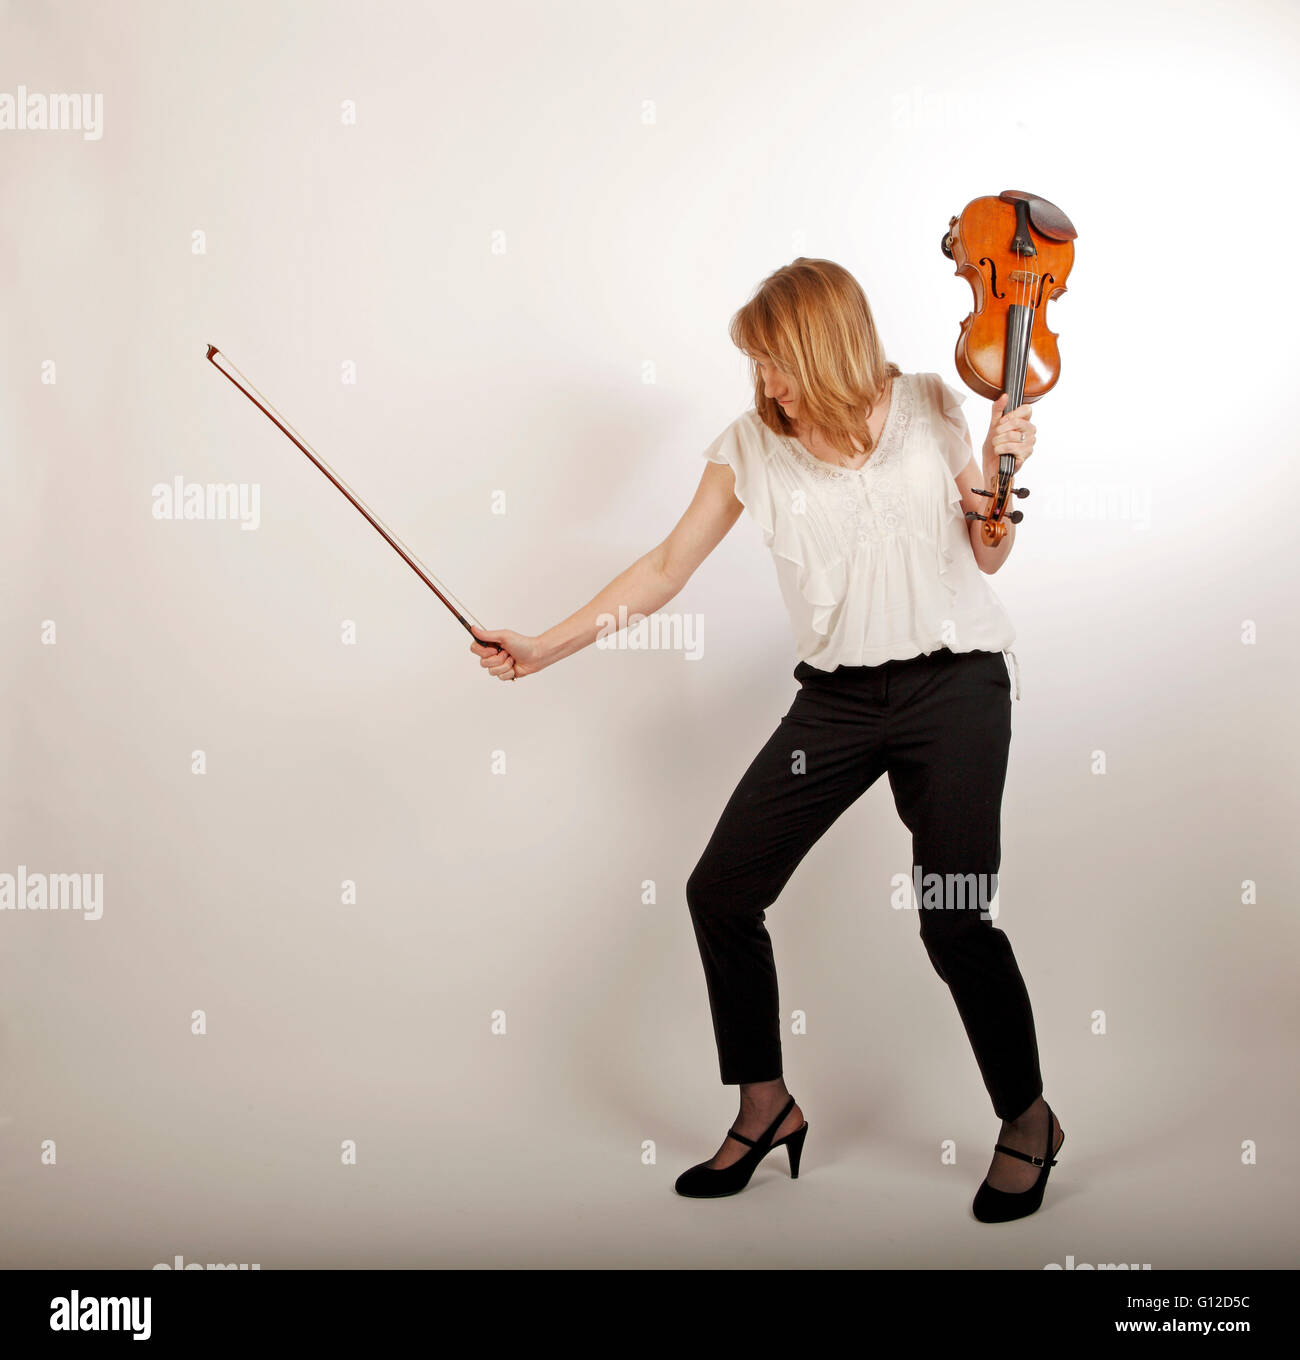 classical dance music, young woman holding a violin and a bow and dancing Stock Photo